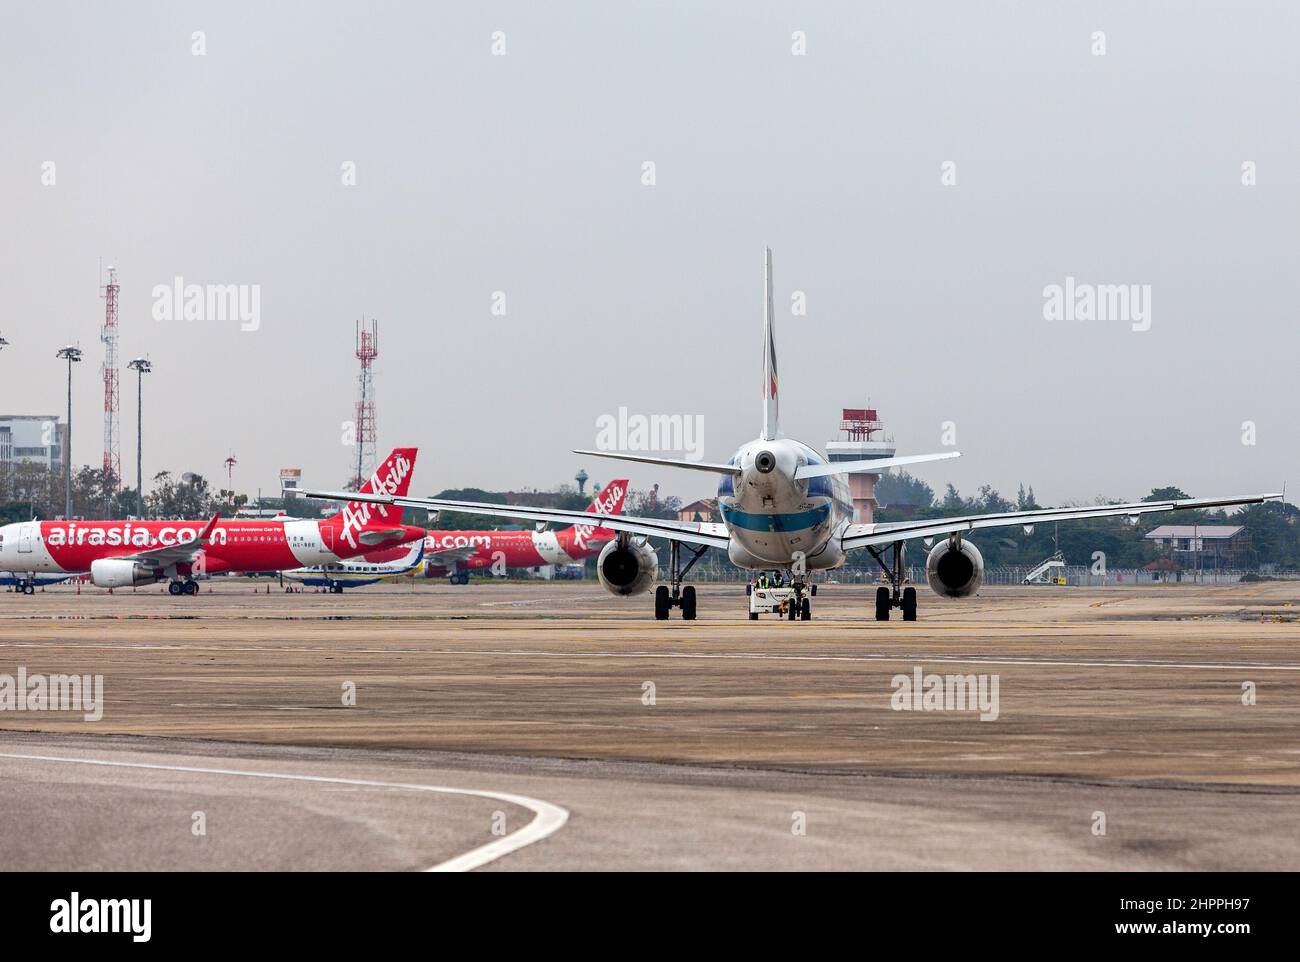 Chiang Mai, Thailand. 22nd Feb, 2022. Bangkok Airways airplane (R) and Thai AirAsia airplane (L) seen on the apron at Chiang Mai International Airport (CNX). Thailand has raised the COVID-19 alert to level 4 following a sharp increase in omicron variant infections nationwide. Credit: SOPA Images Limited/Alamy Live News Stock Photo